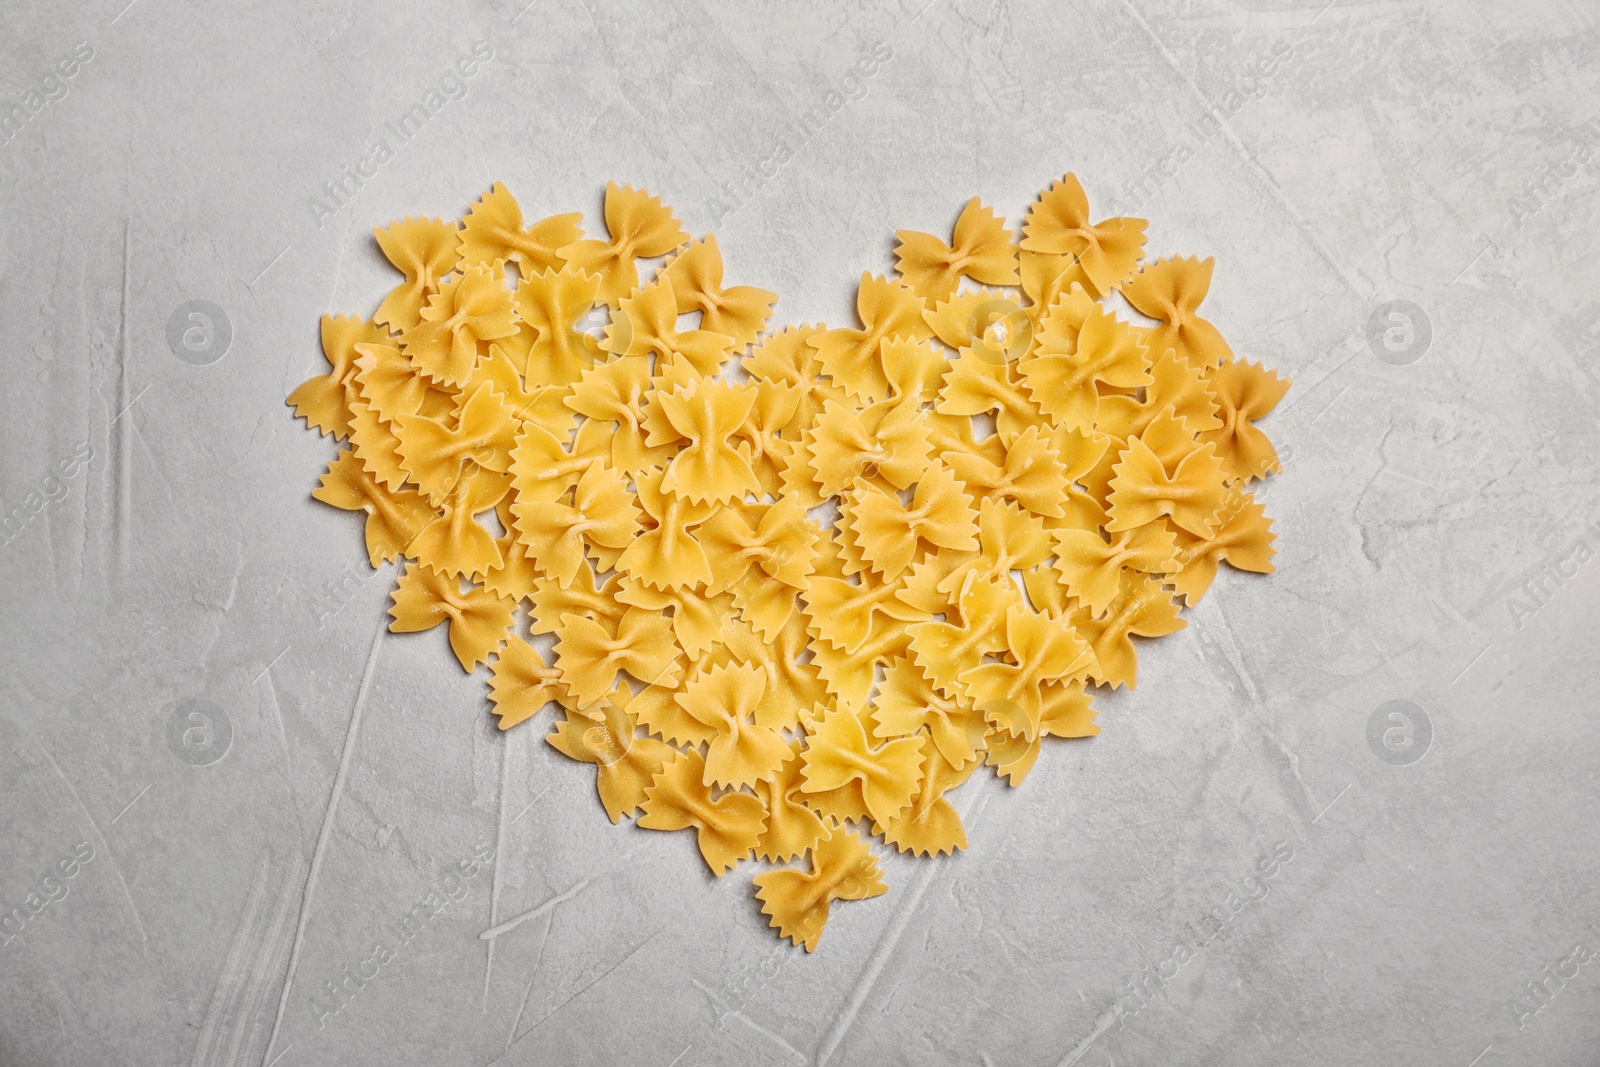 Photo of Heart made of uncooked pasta on grey background, top view